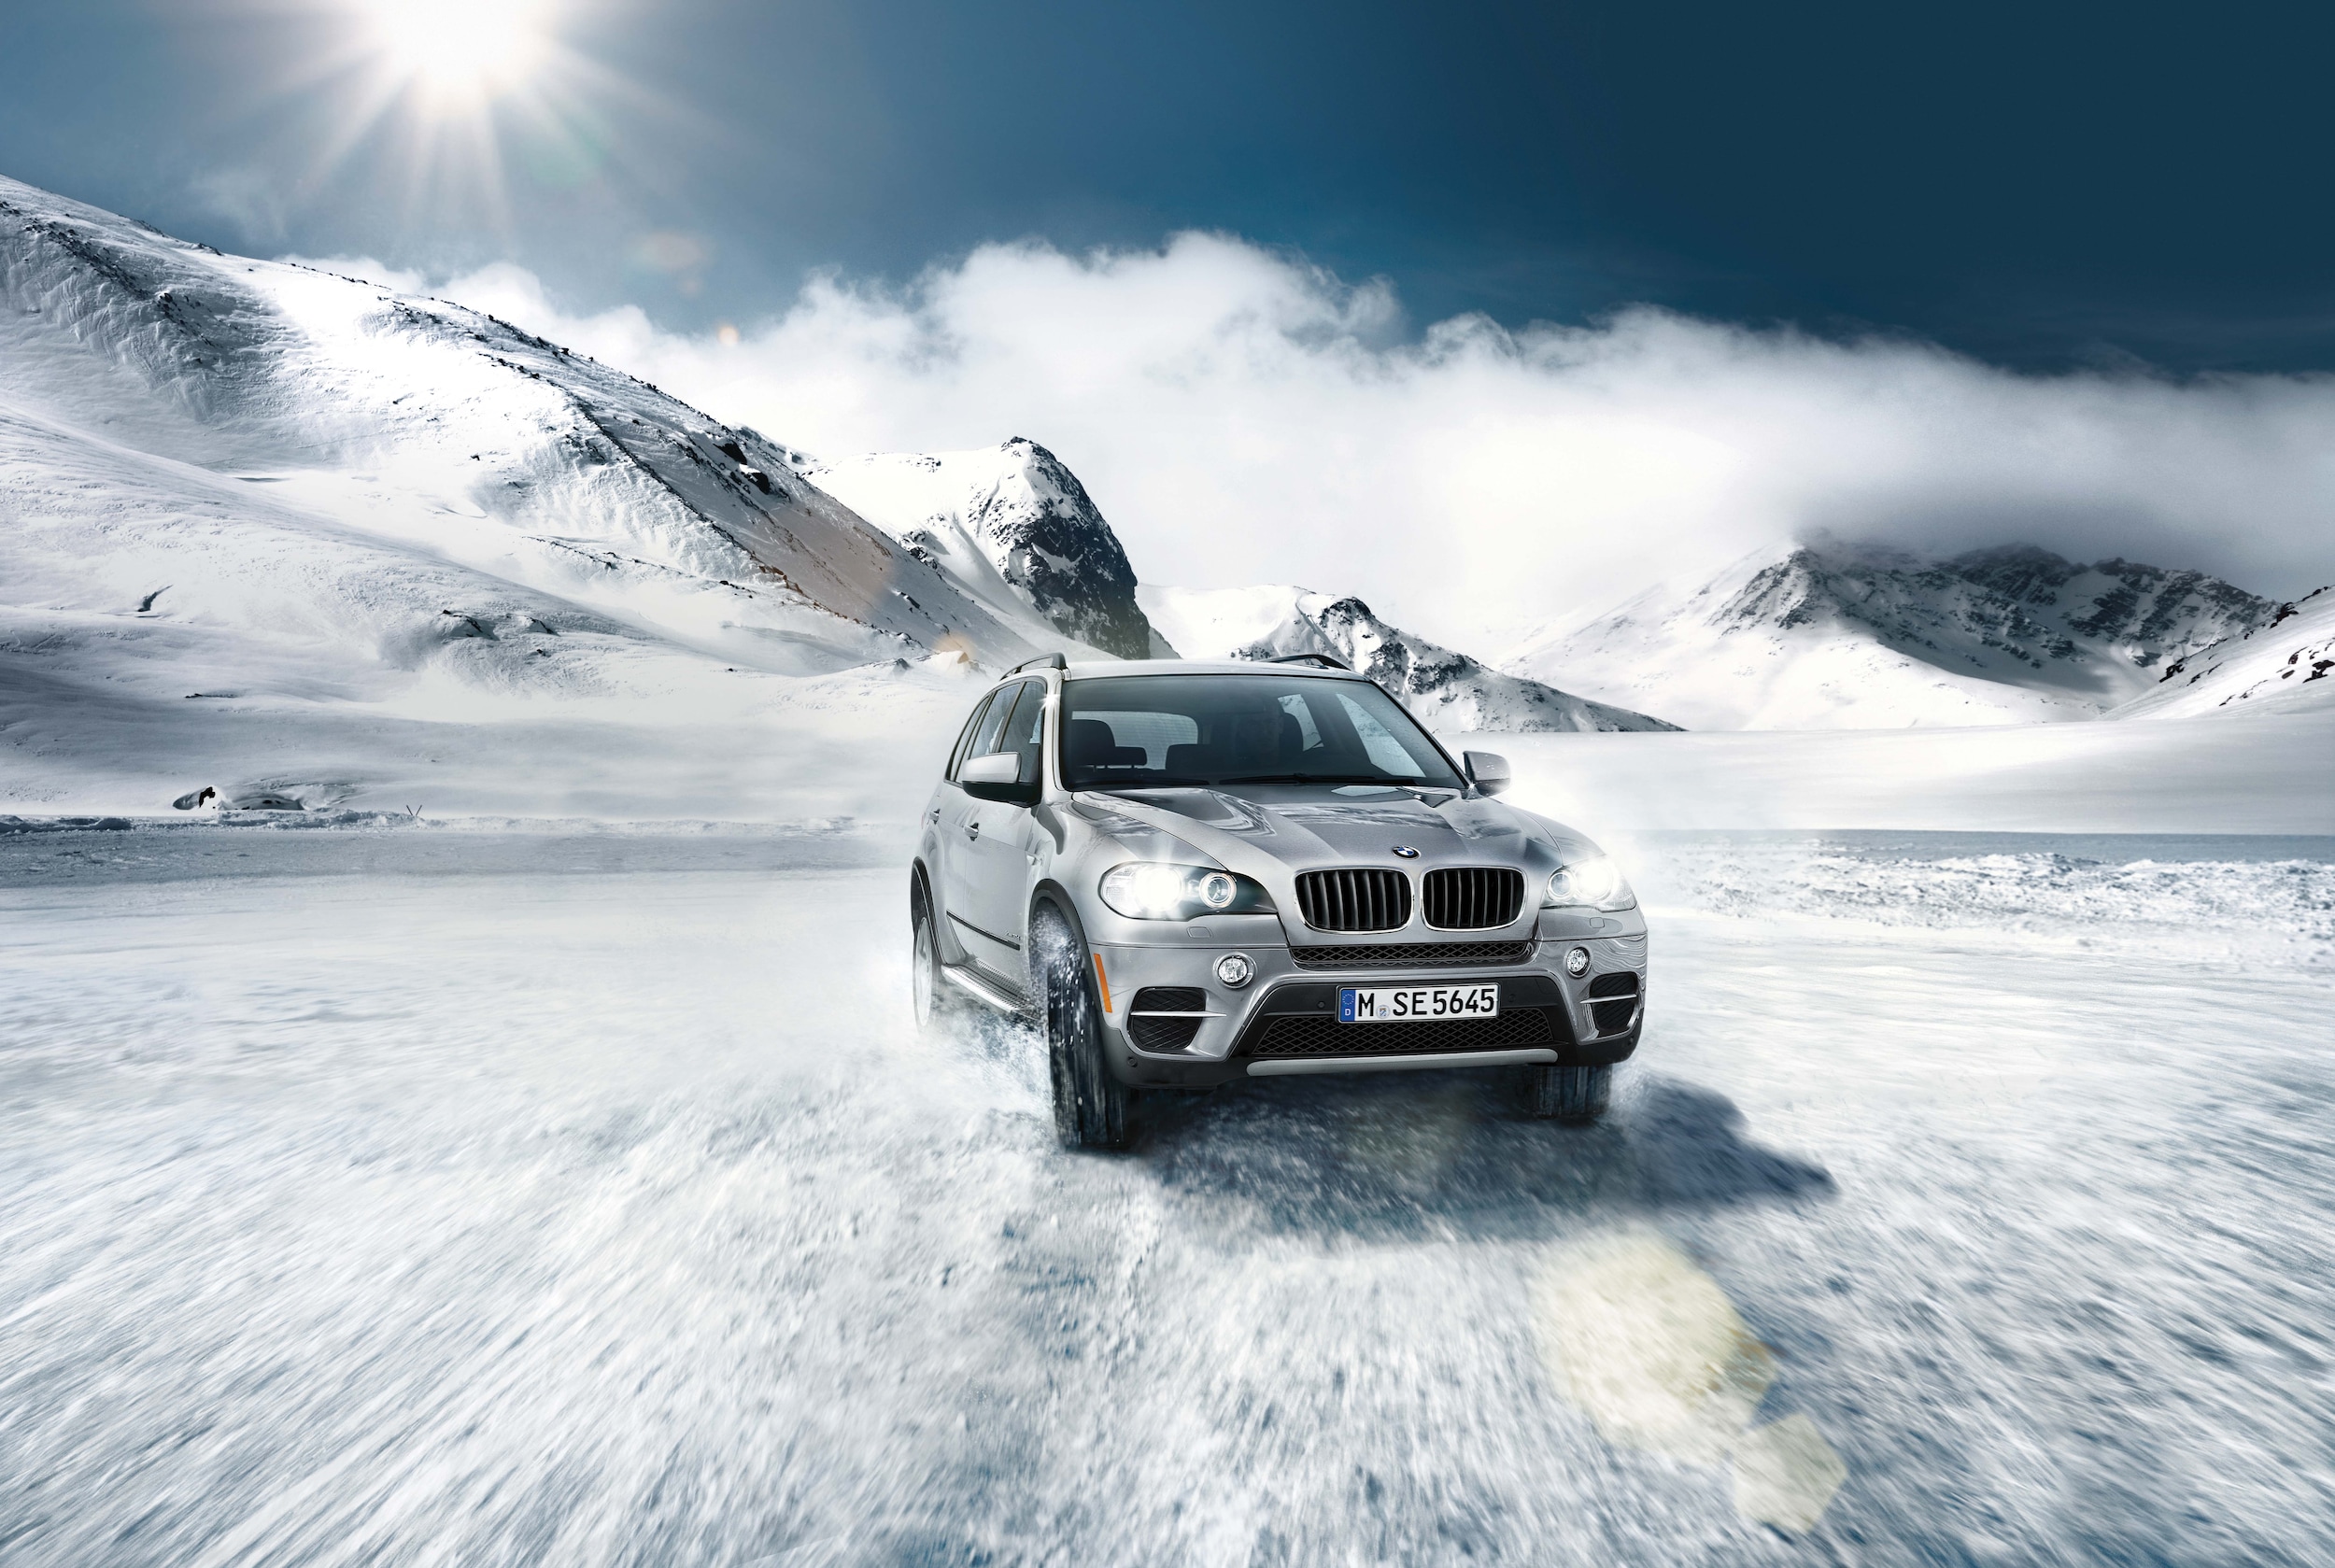 Bmw winter driving tips #7